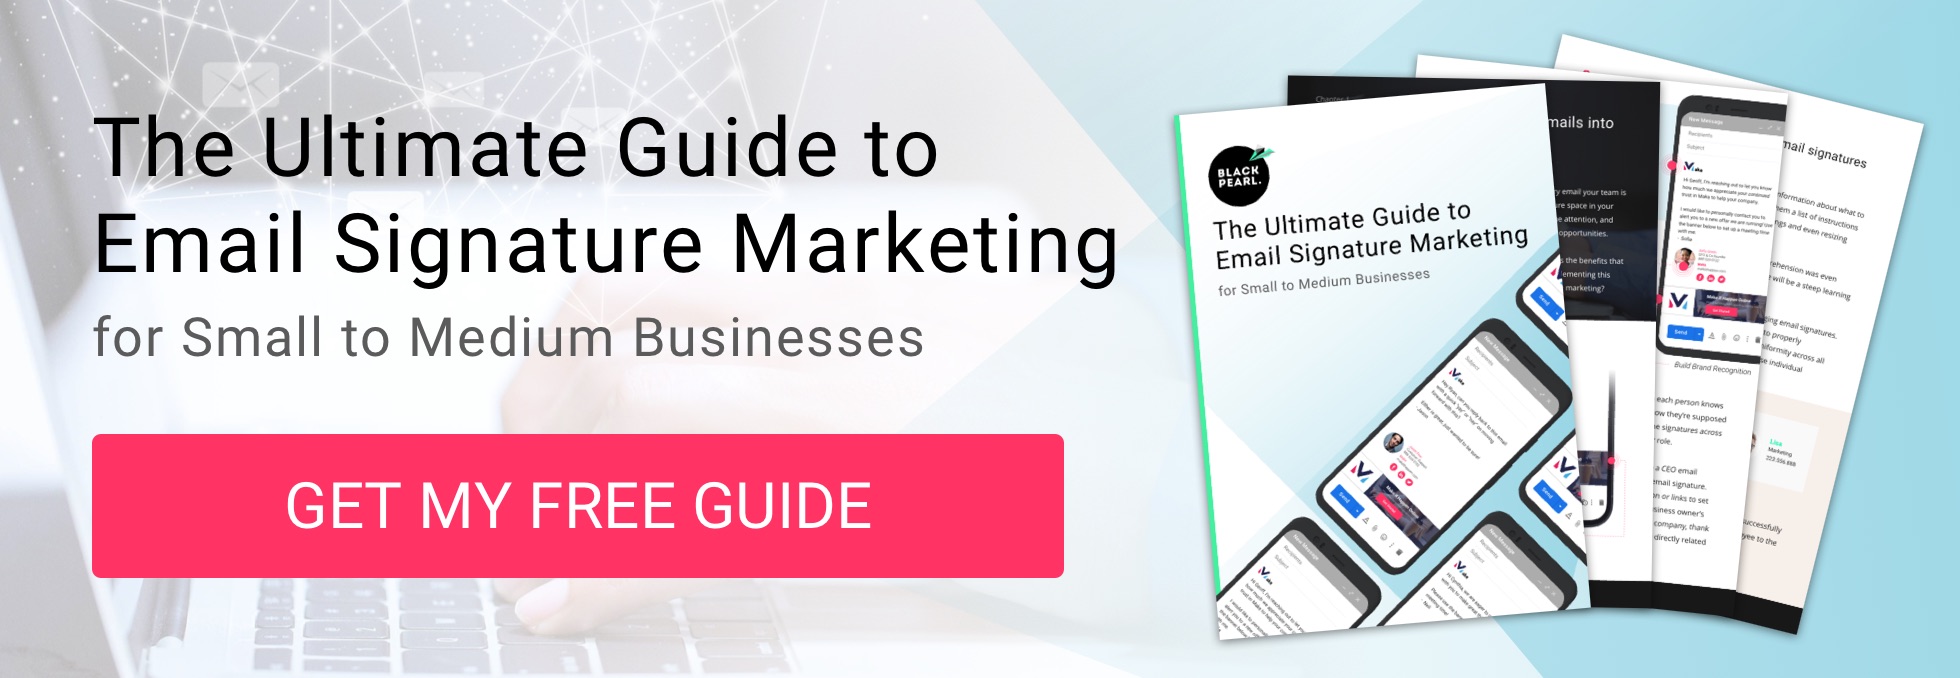 CTA-The-Ultimate-Guide-to-Email-Signature-Marketing-for-Small-to-Medium-Businesses